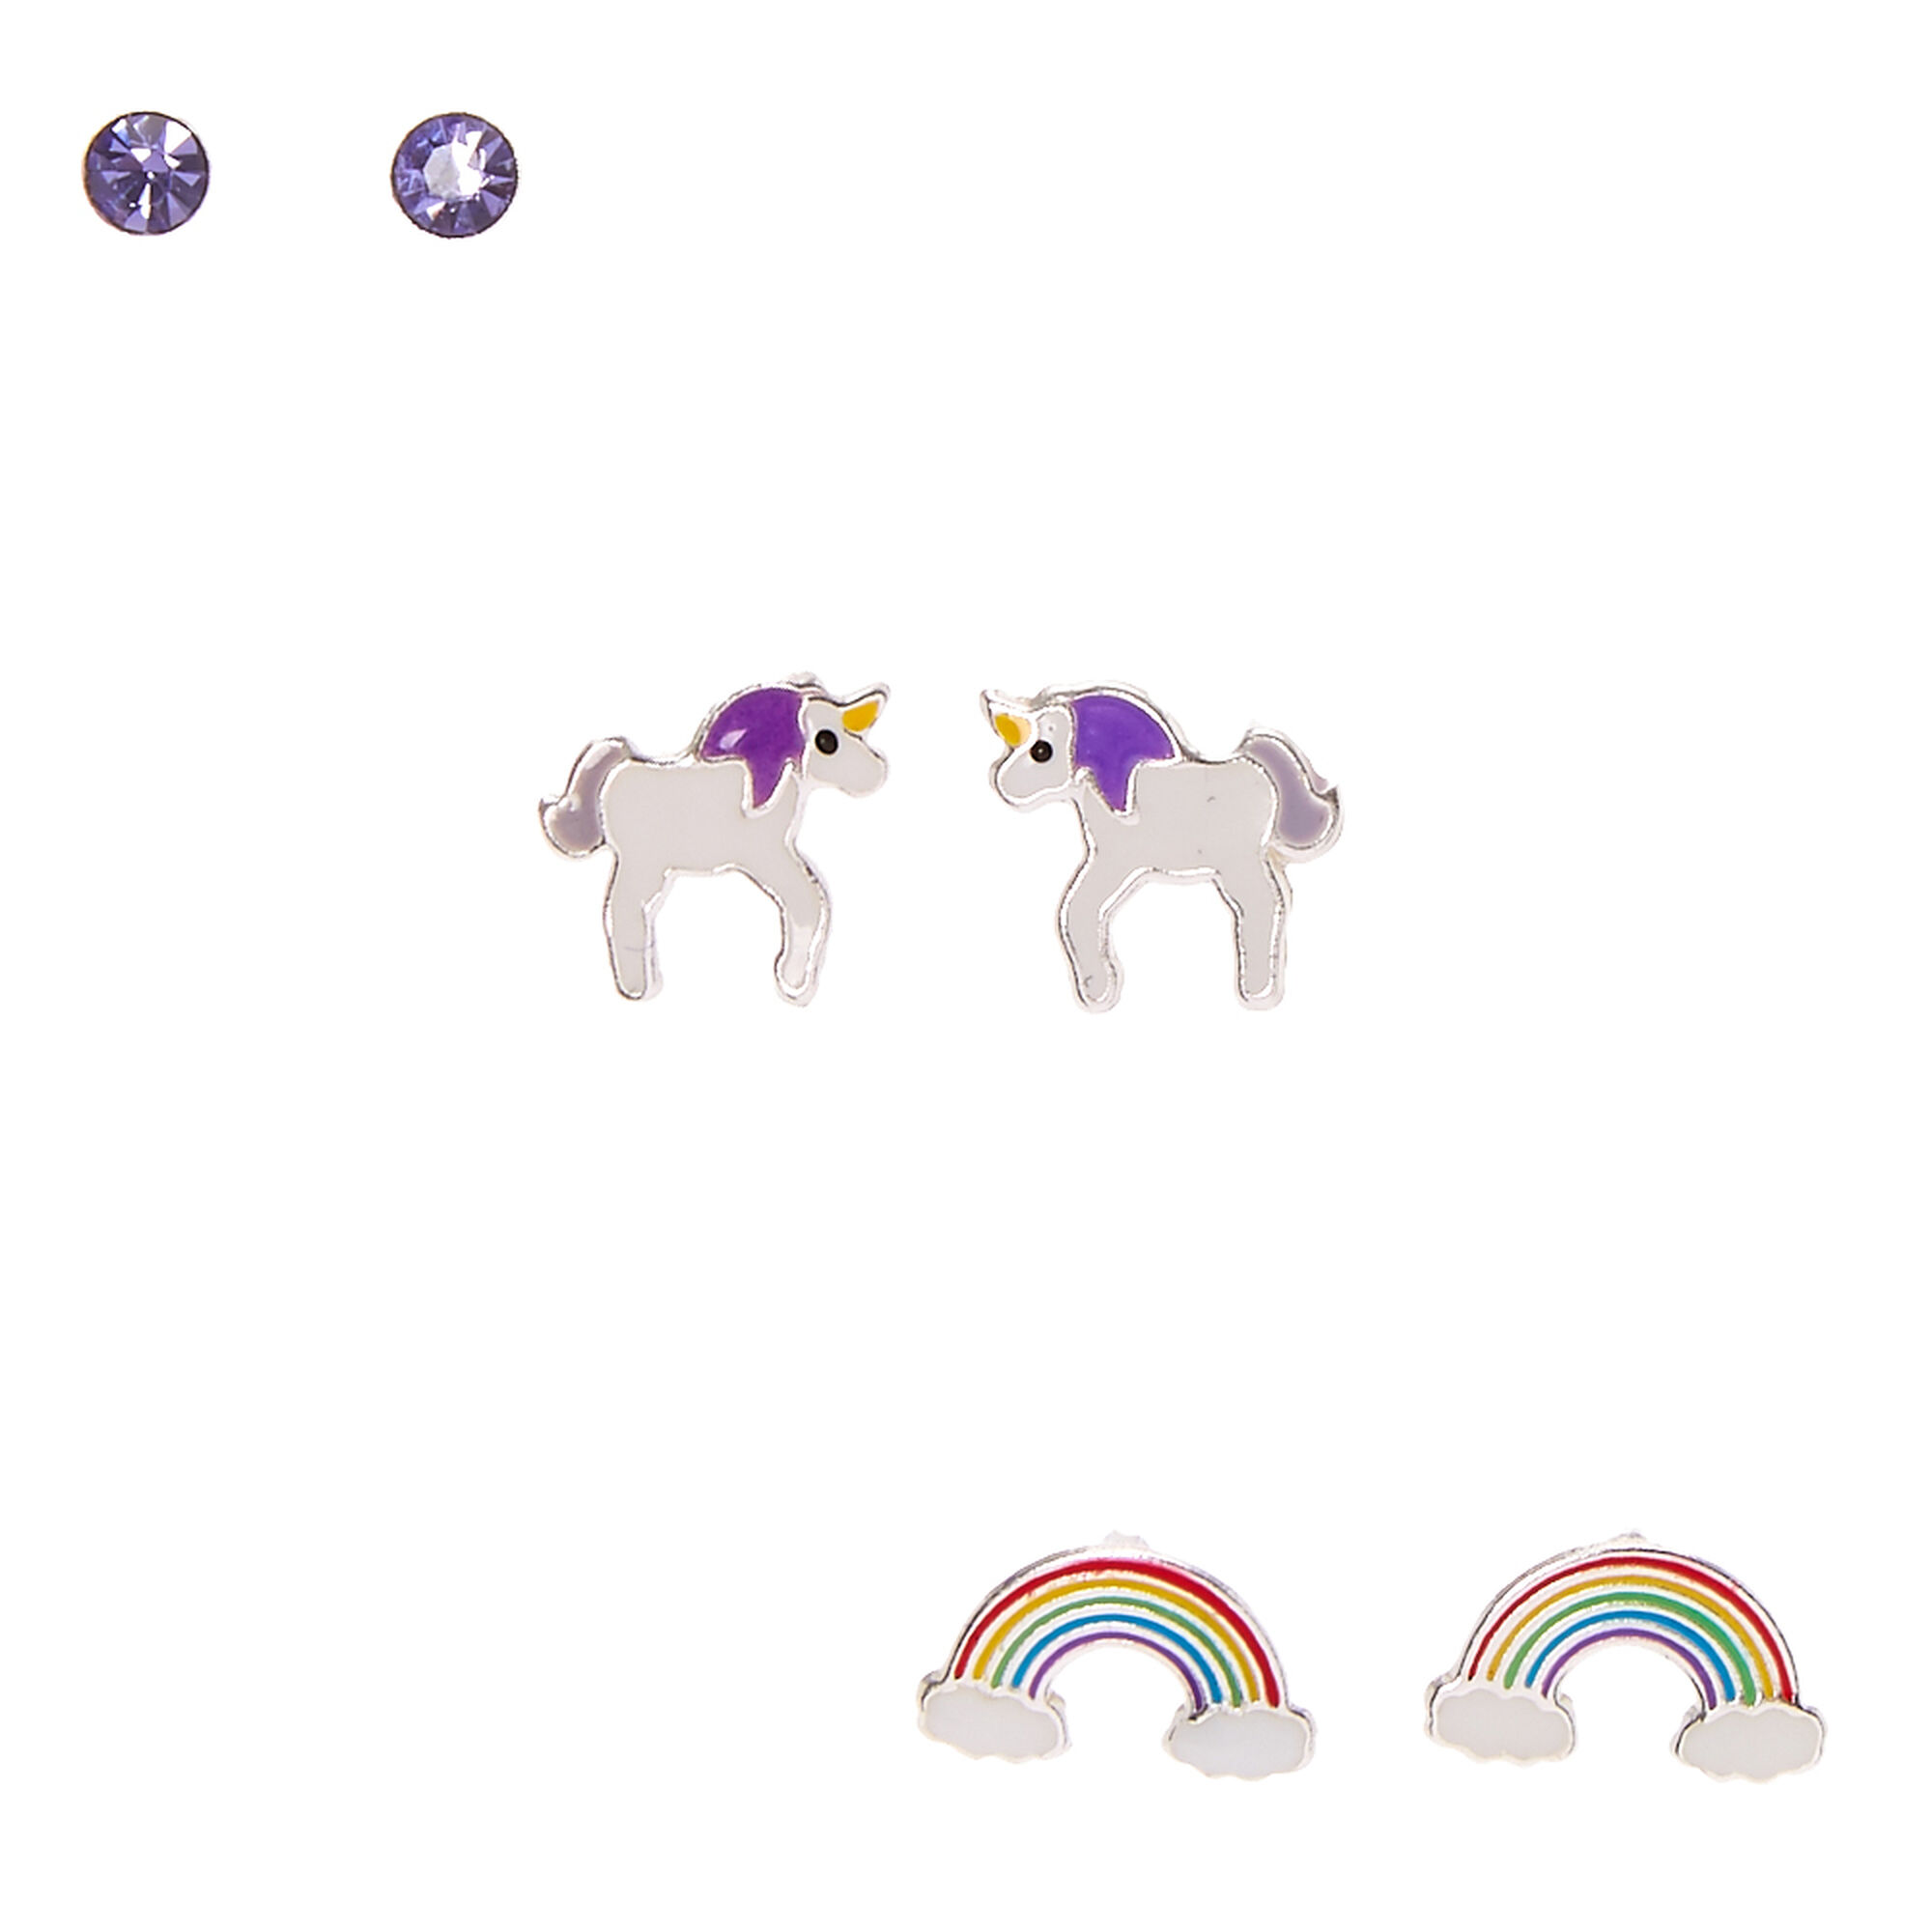 View Claires Rainbow Unicorn Dreams Stud Earrings 3 Pack Silver information